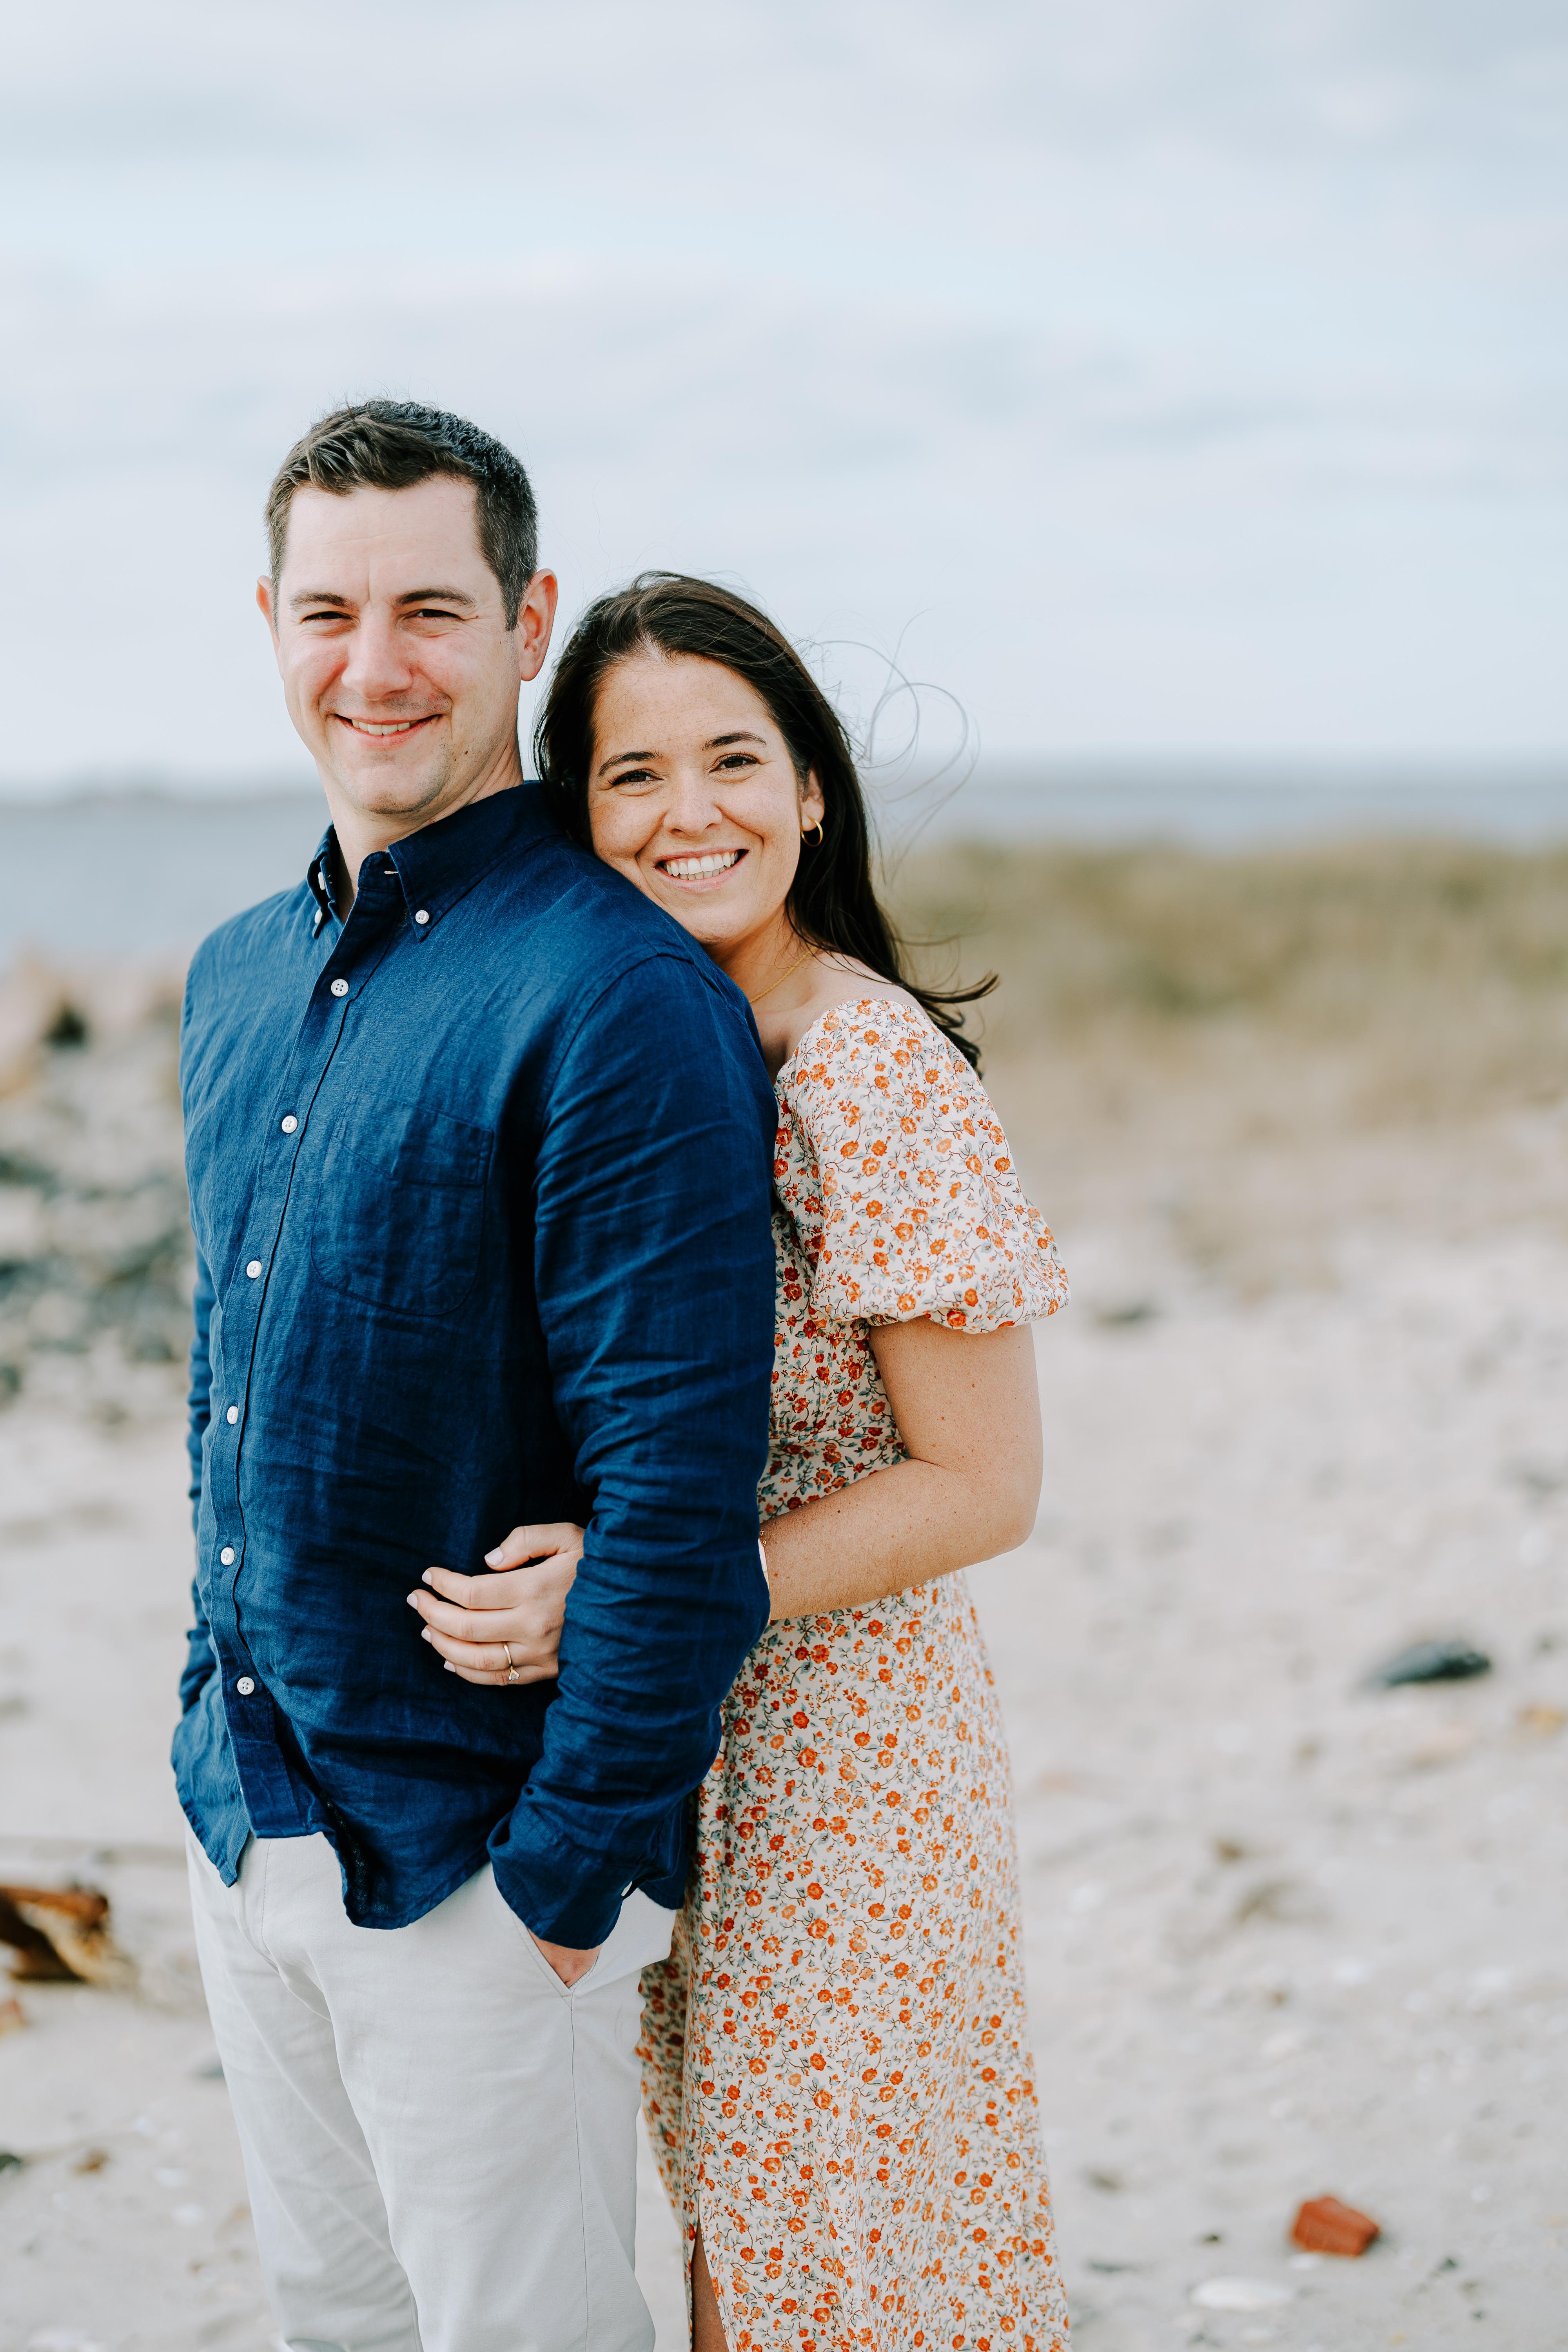 The Wedding Website of Emily Harms and Michael Nicoletti